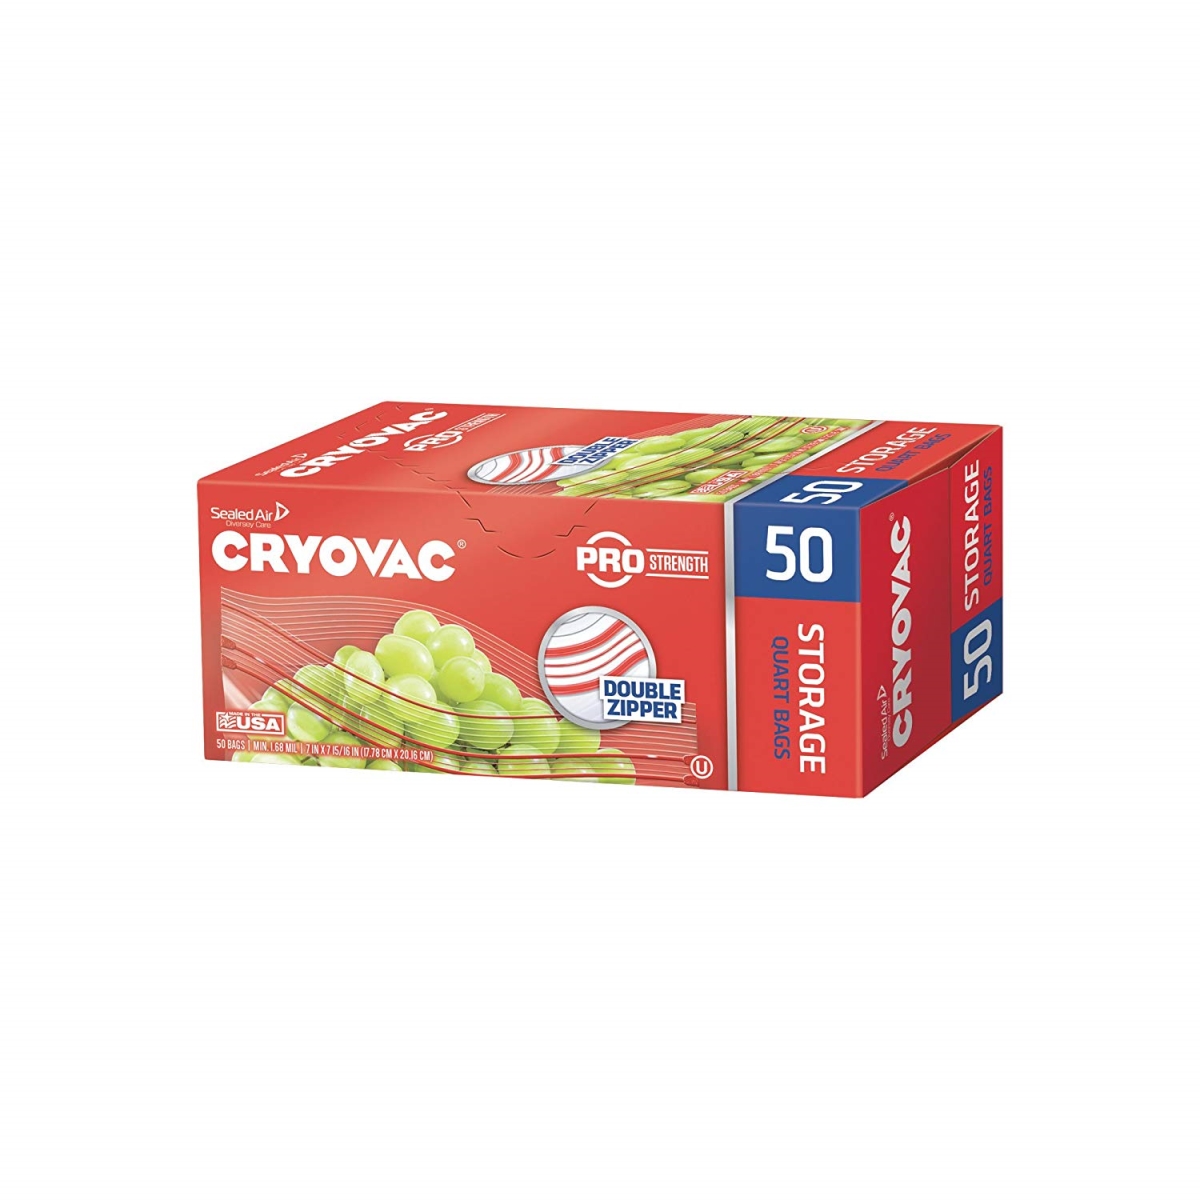 100946911 1 Qt. Cryovac Resealable Double Zipper Storage Bags